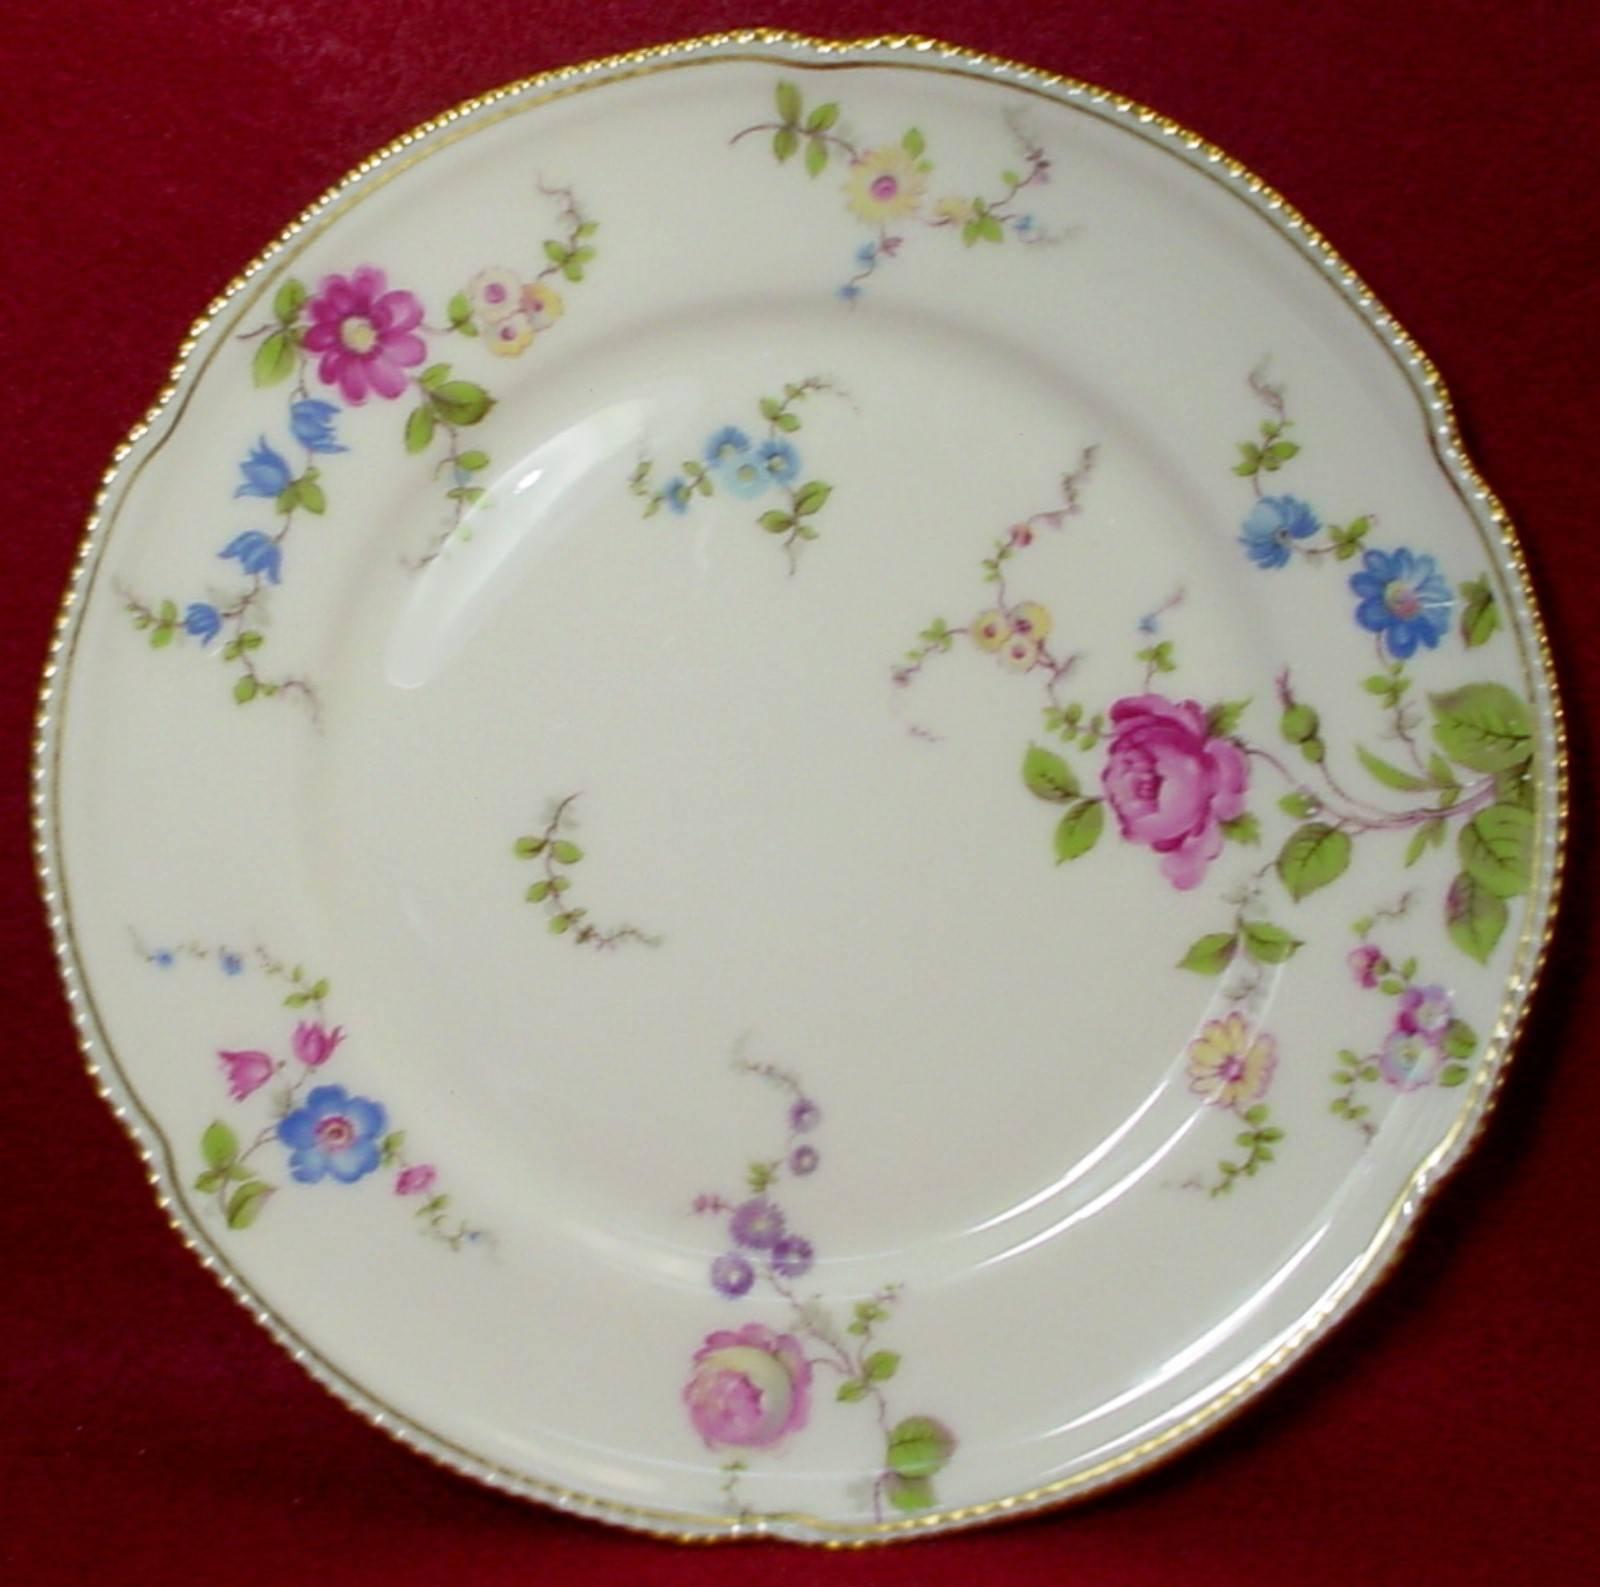 
CHINA FINDERS 

China, Crystal, Flatware and Collectible Matching Service is offering ONE (1) 

CASTLETON china SUNNYVALE pattern 60-Piece SET SERVICE for 12

in great condition free from chips, cracks, break or stain and show minimal